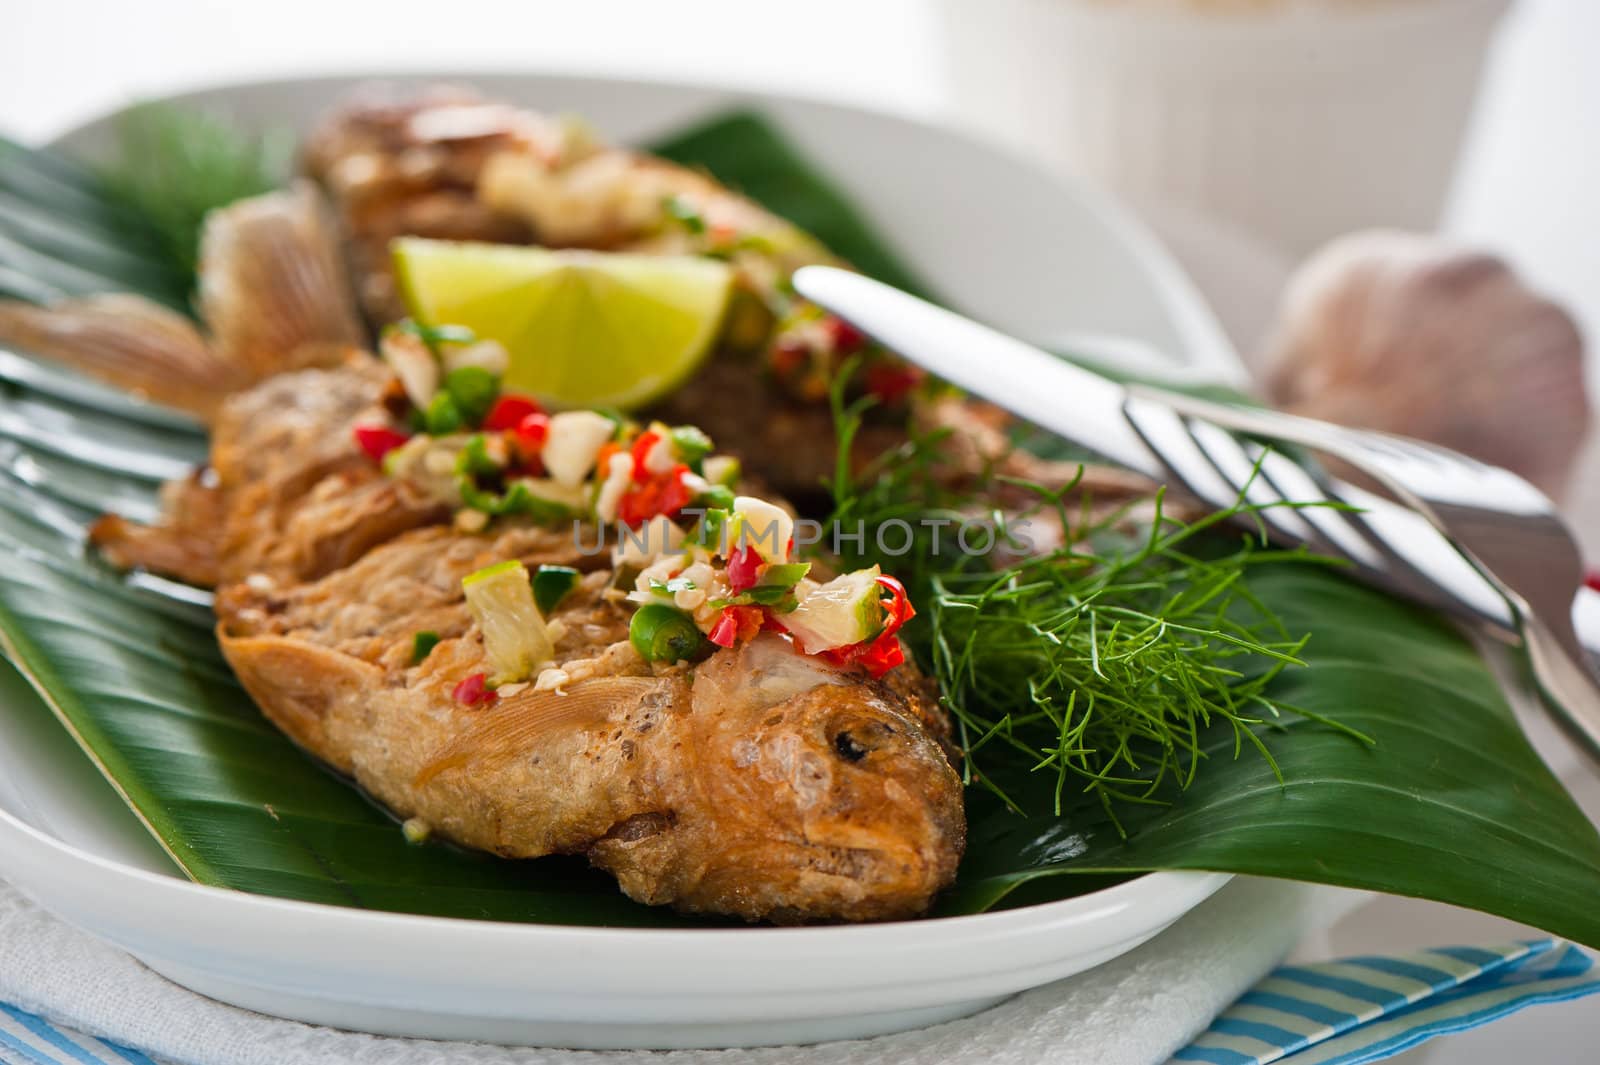 Fresh fried fish with chili sauce garlic and dill